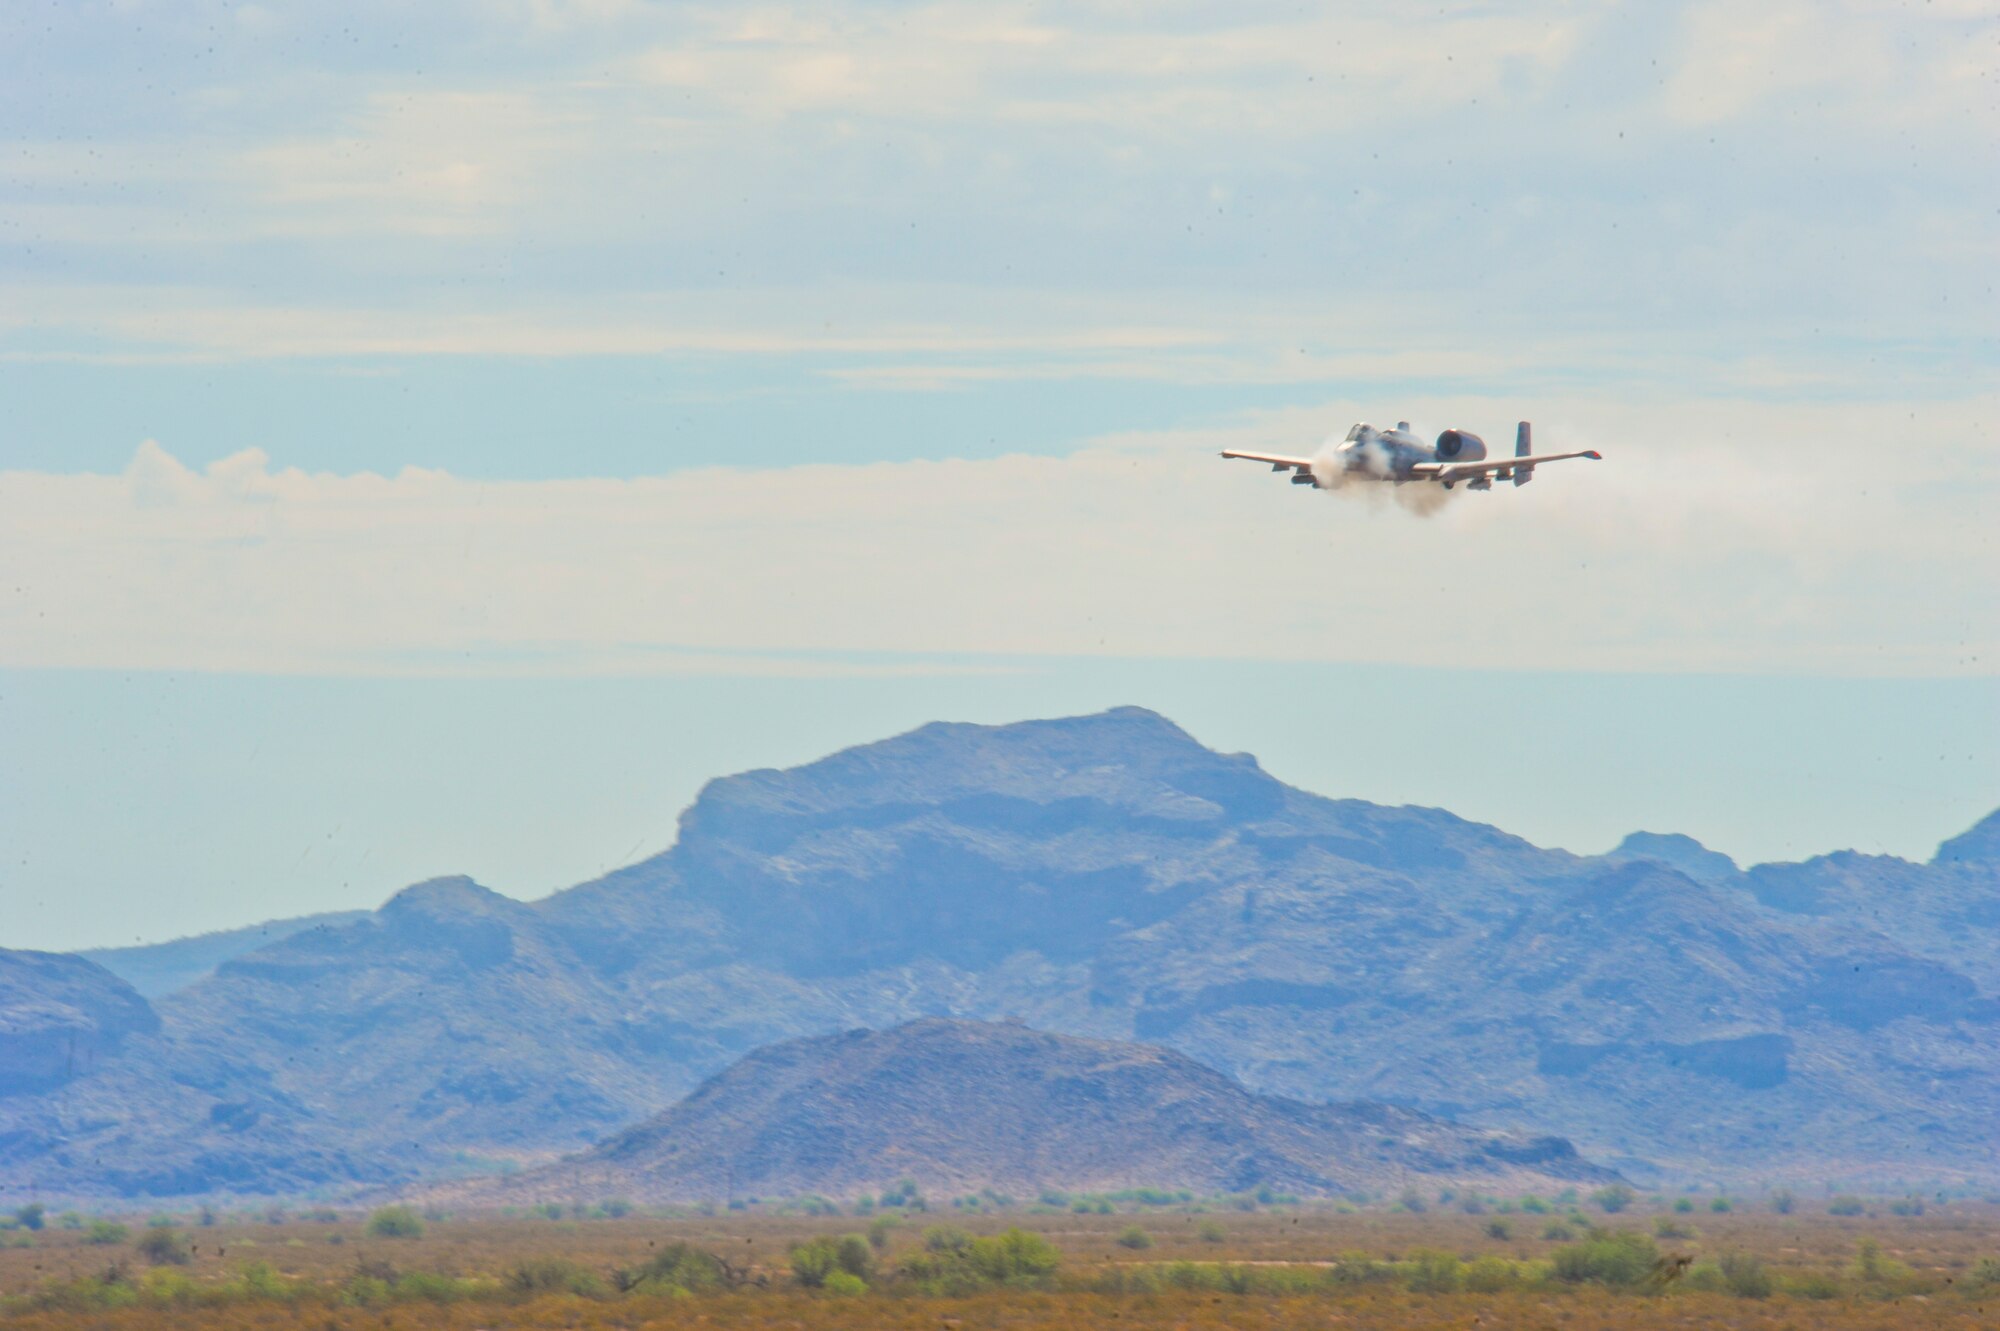 U.S. Air Force A-10 Thunderbolt II strafes during the 2014 Hawgsmoke Competition at Barry M. Goldwater Range Two in Tucson, Ariz., July 10, 2014. This year’s Hawgsmoke competition focused on forward firing. The participants competed in high, medium, and low-angle strafes. (U.S. Air Force photo by Airman 1st Class Sivan Veazie/Released)